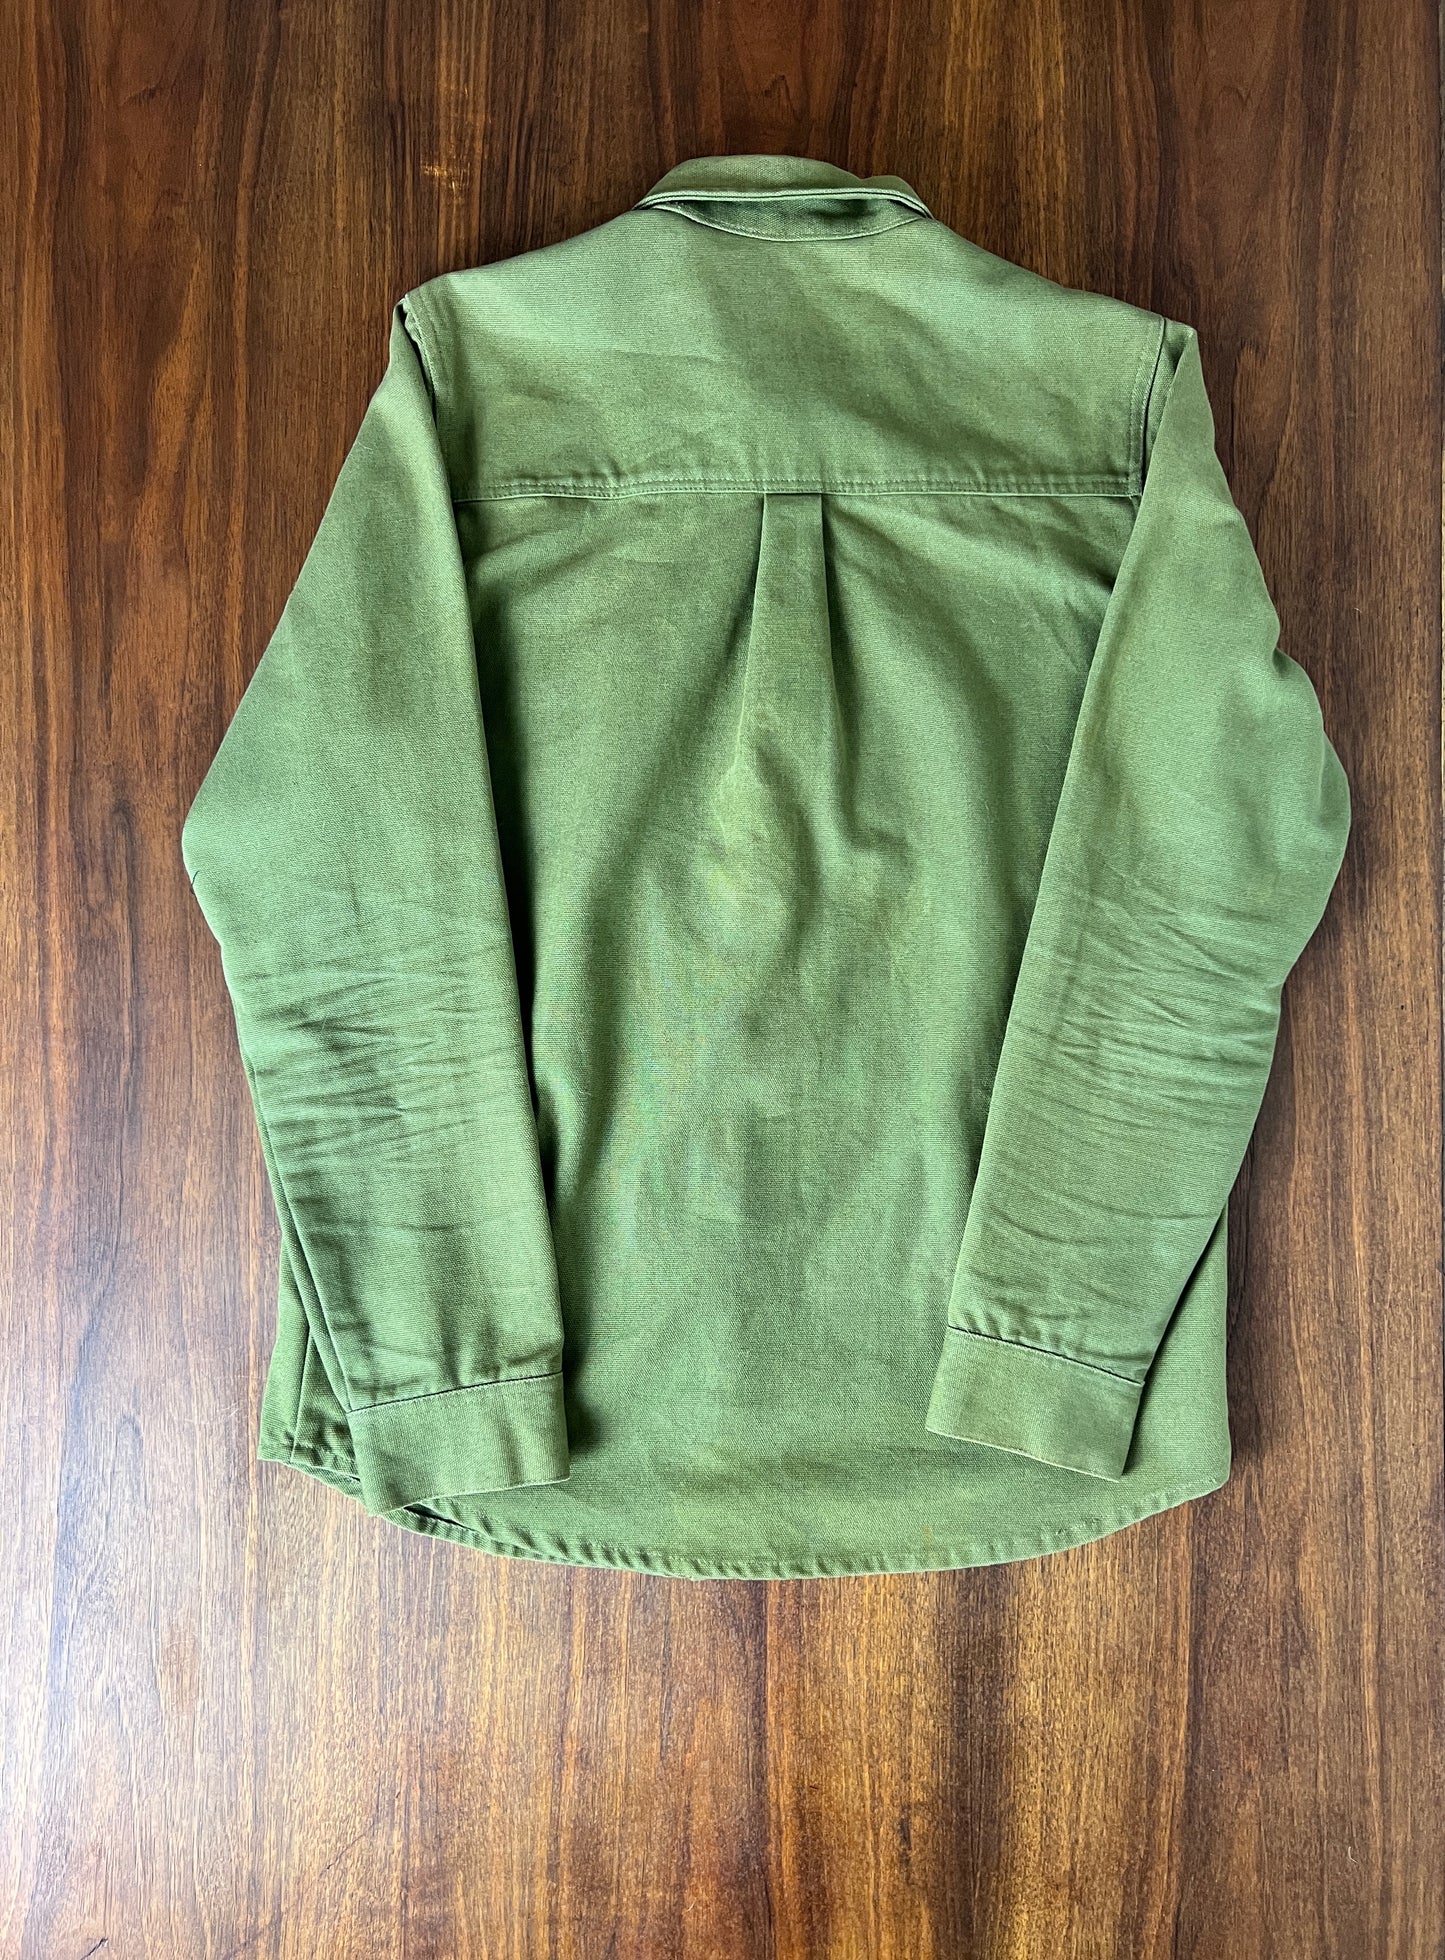 The Army Green Overshirt